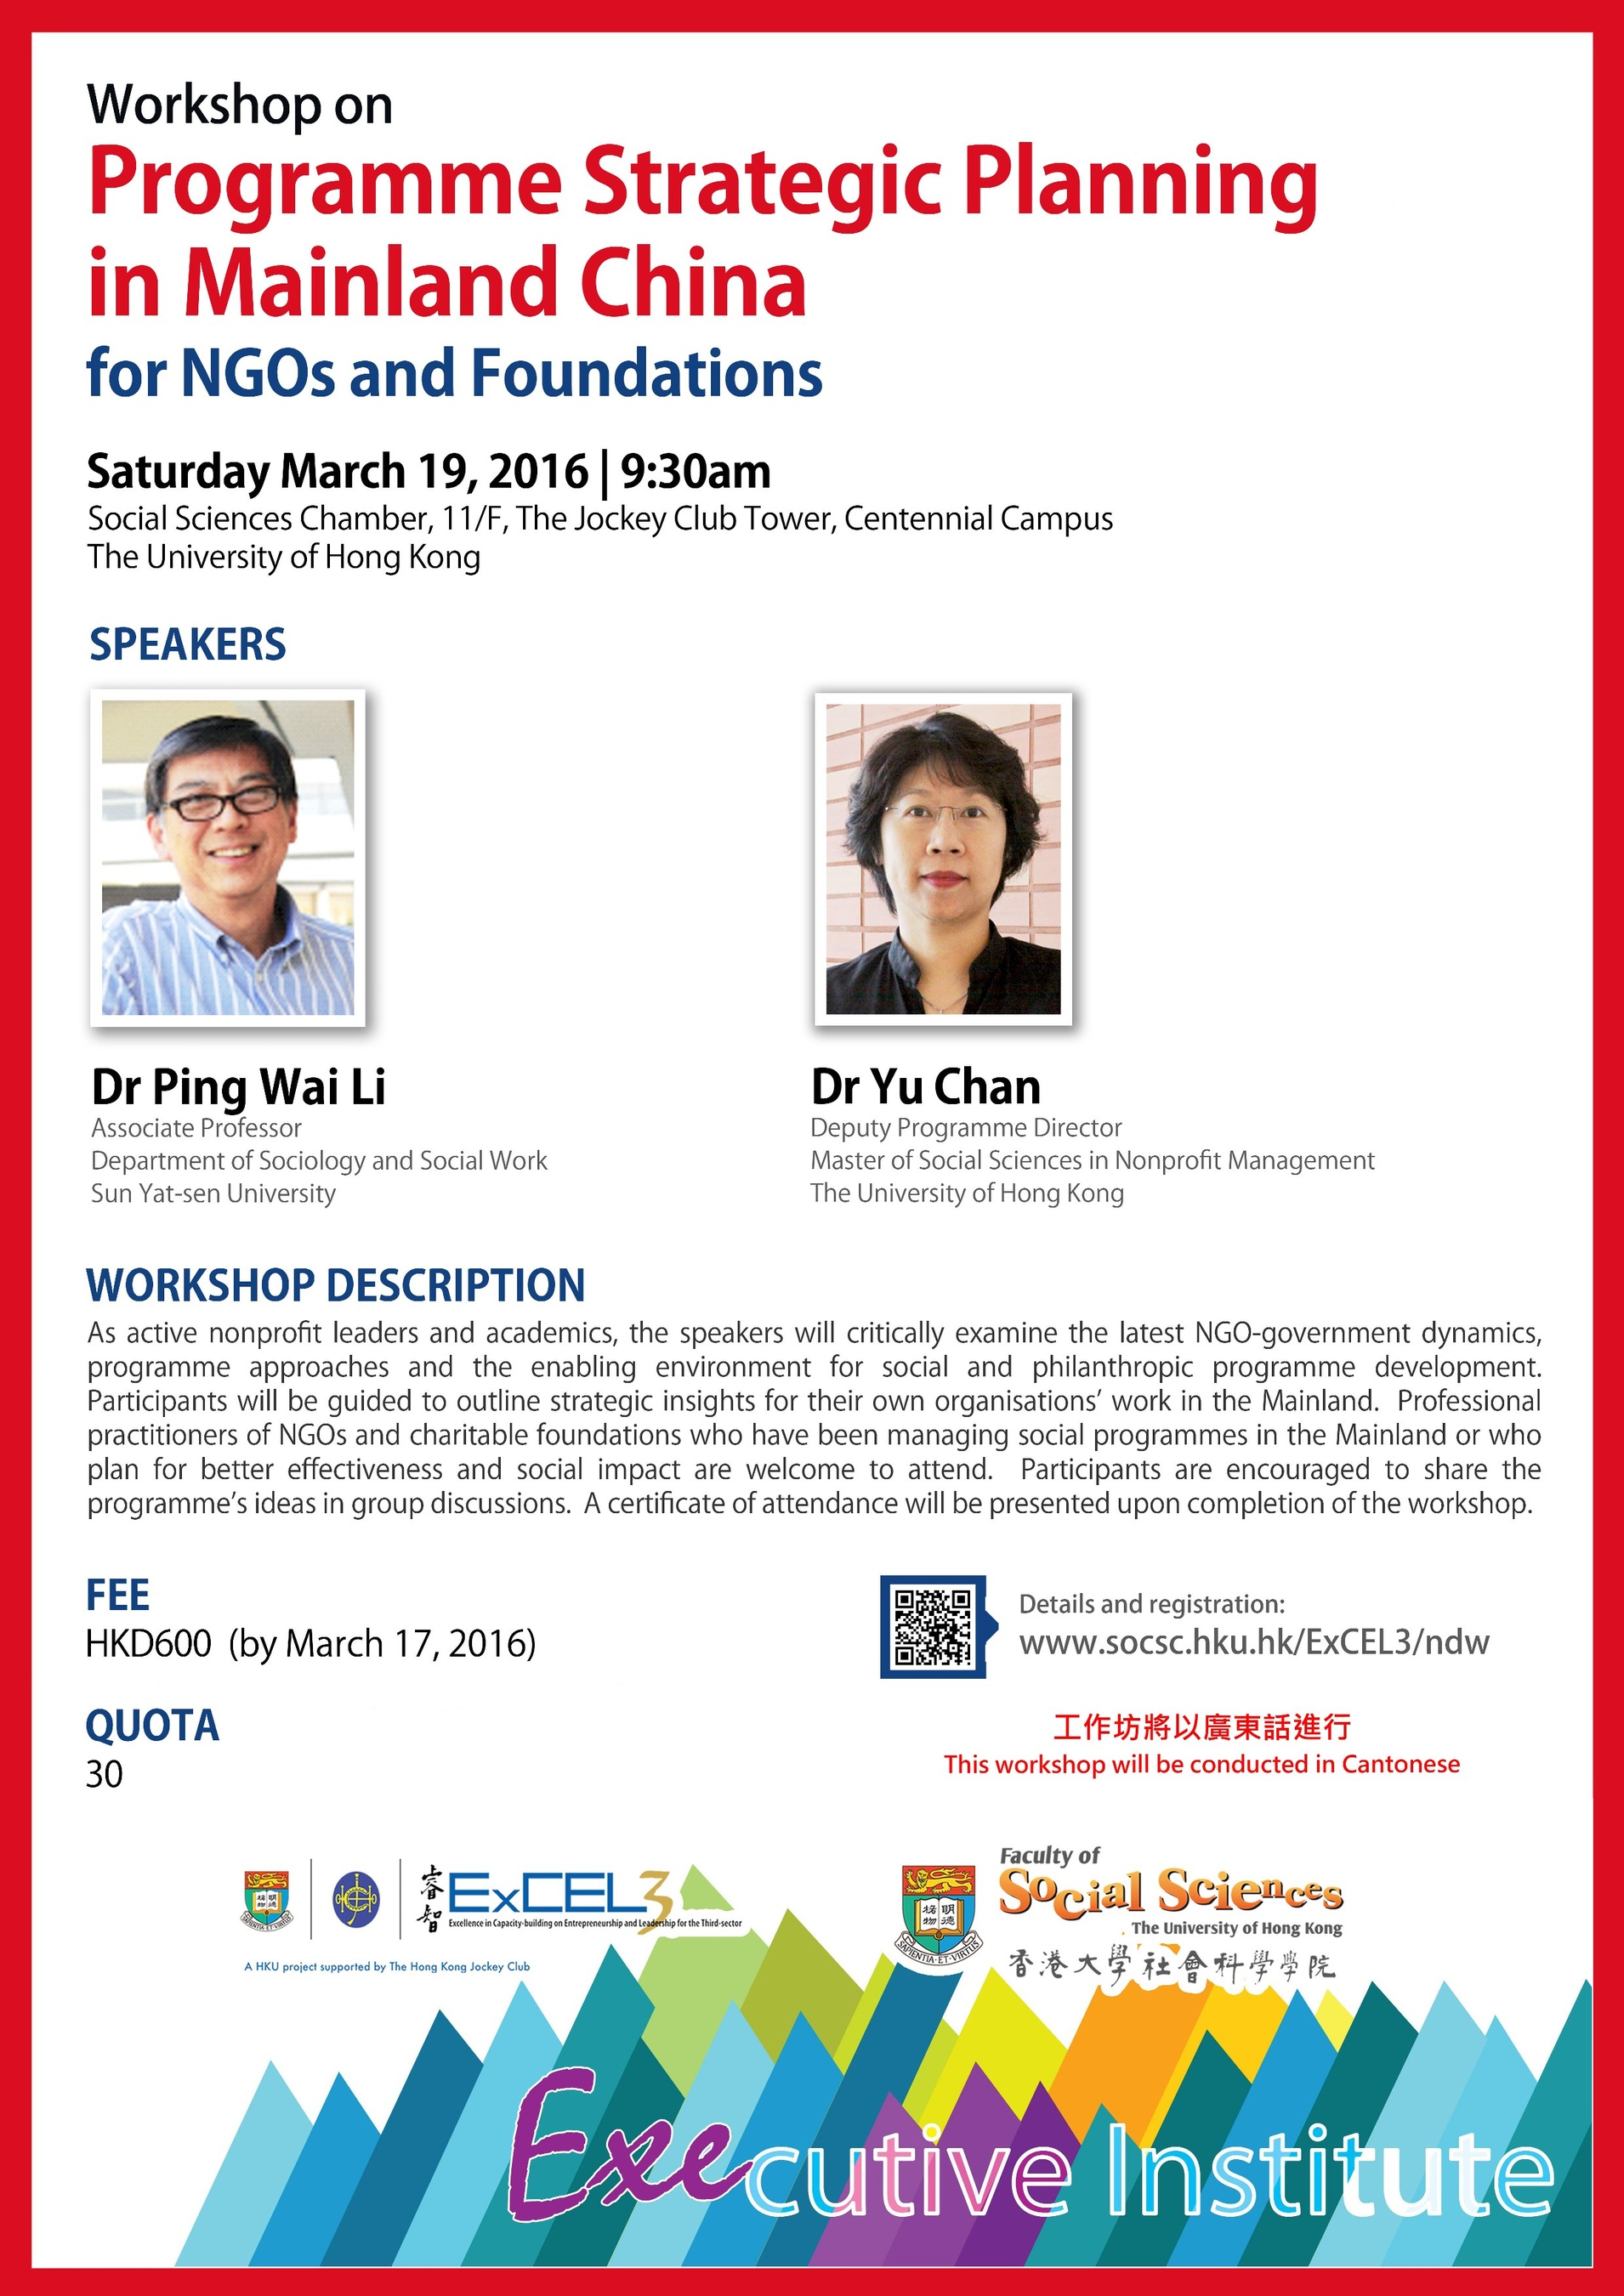 Workshop on Programme Strategic Planning in Mainland China for NGOs and Foundations